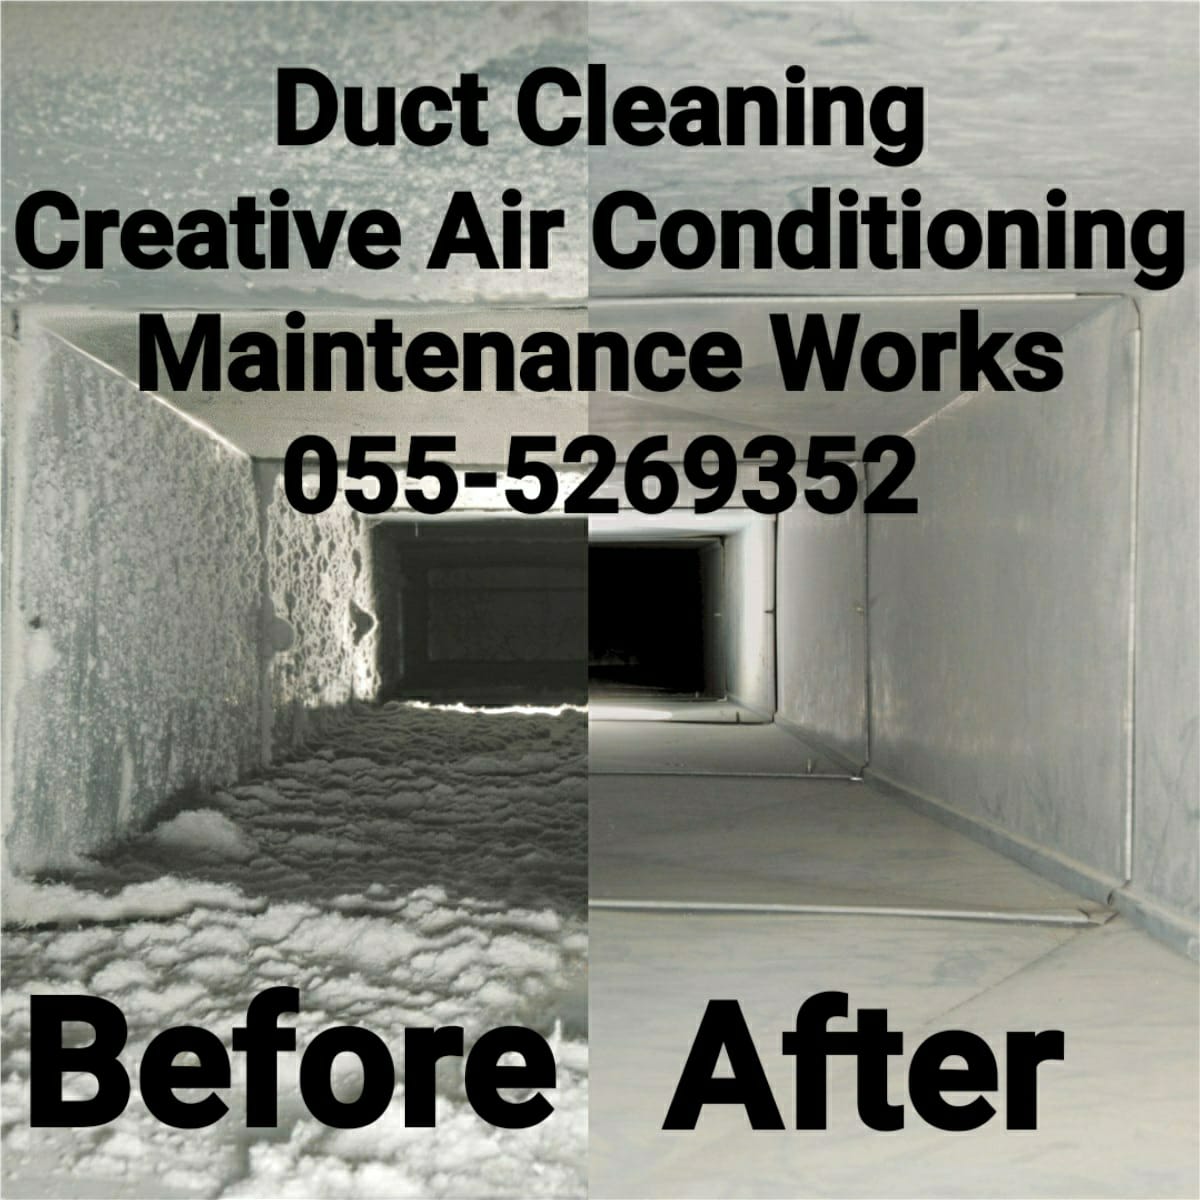 Duct Cleaning In Dubai At Low Cost 055 5269352 Ajman Sharjah Central Split Coil Filter Ducting Handyman Maintenance Gas